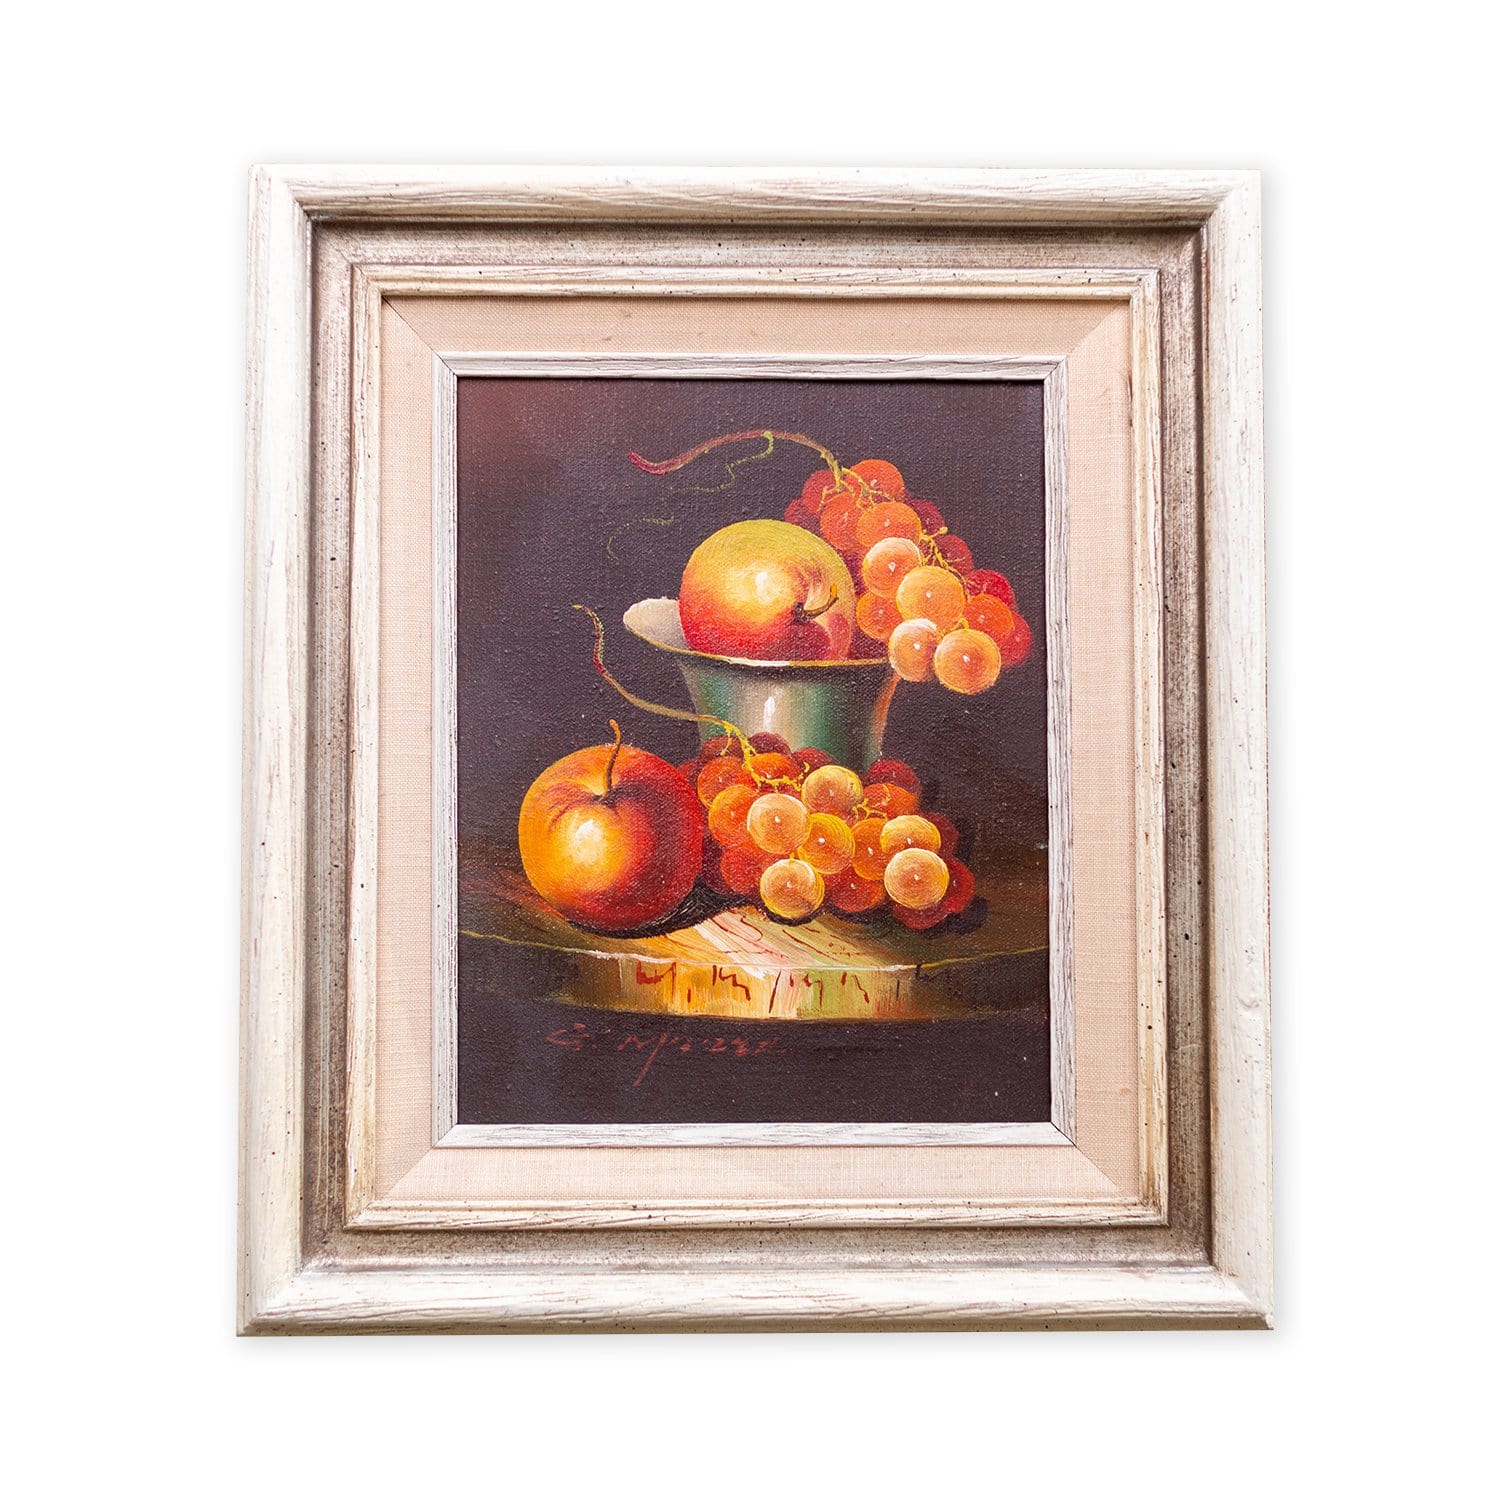 Vintage Apples and Grapes Still Life Oil Painting; Framed and Signed